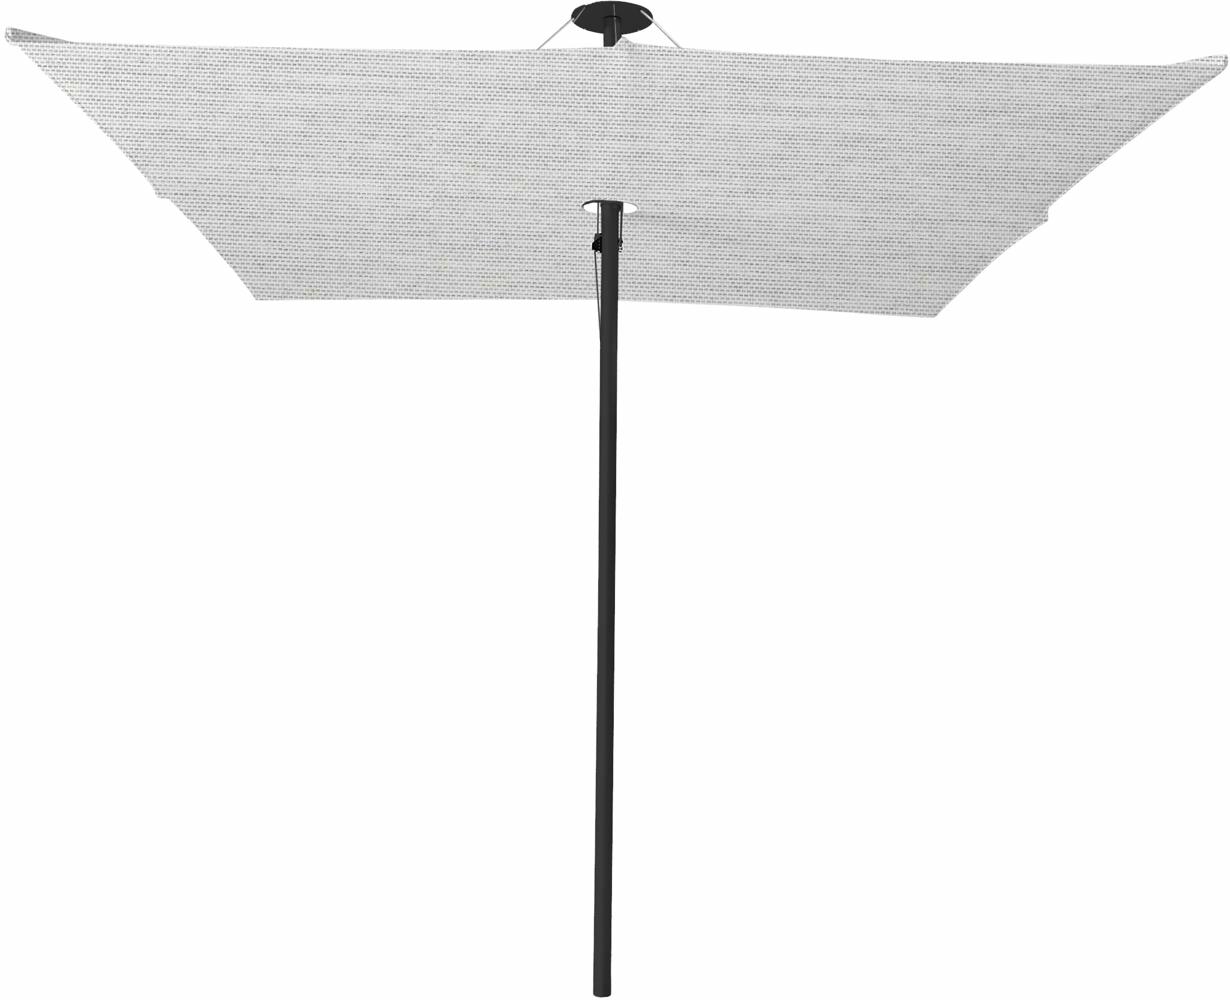 Infina center post umbrella, 3 m square, with frame in Dusk and Colorum Marble canopy.